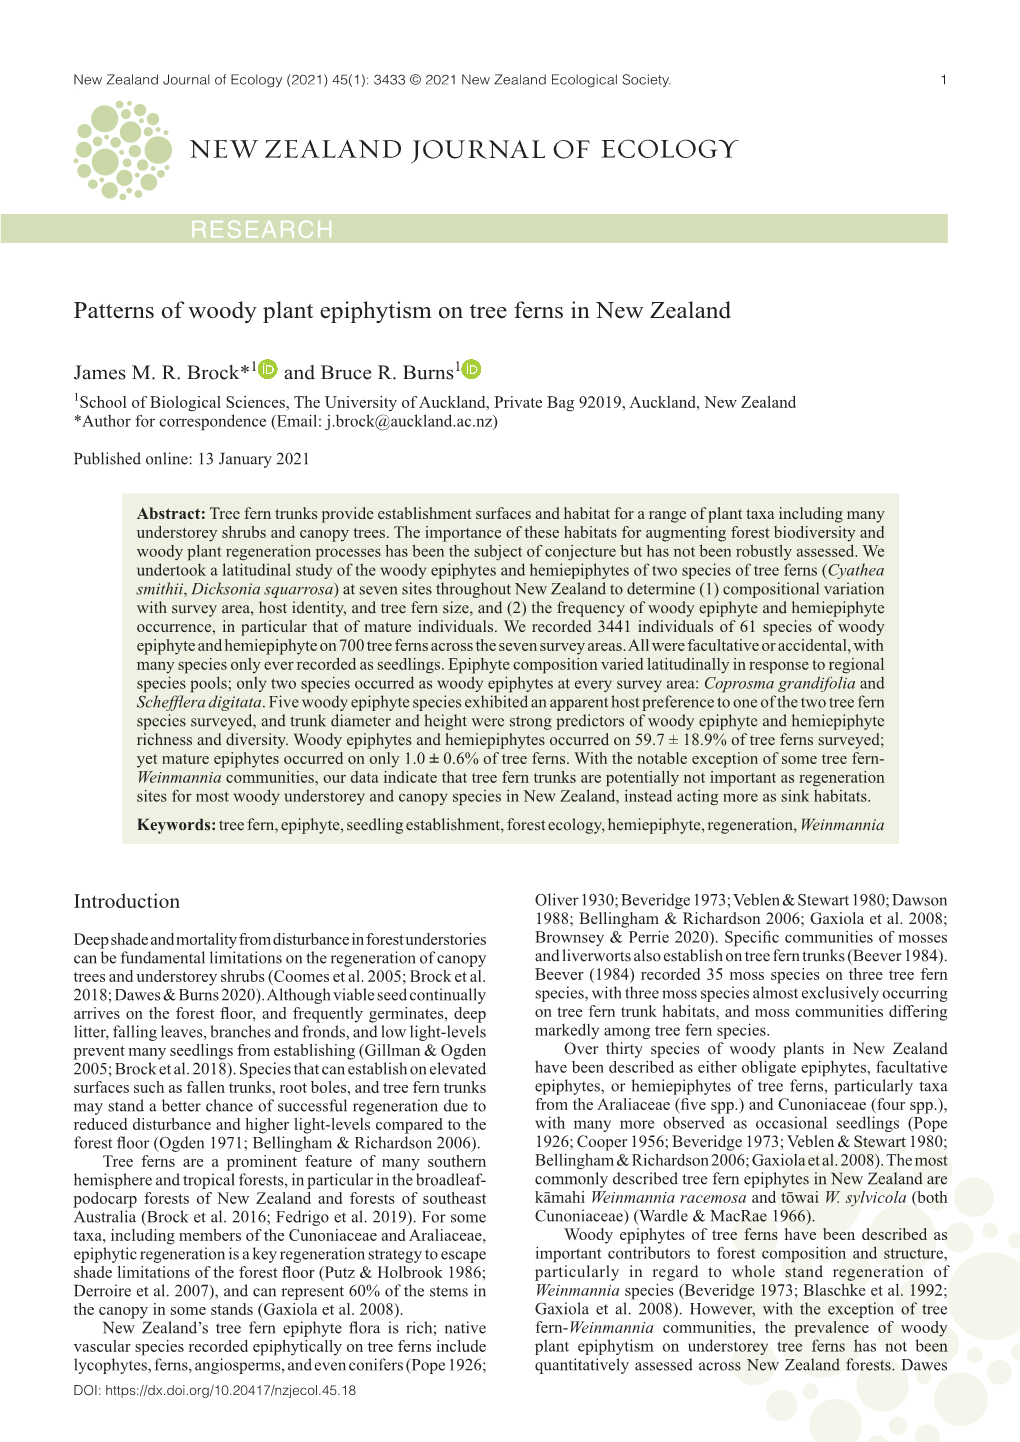 RESEARCH Patterns of Woody Plant Epiphytism on Tree Ferns in New